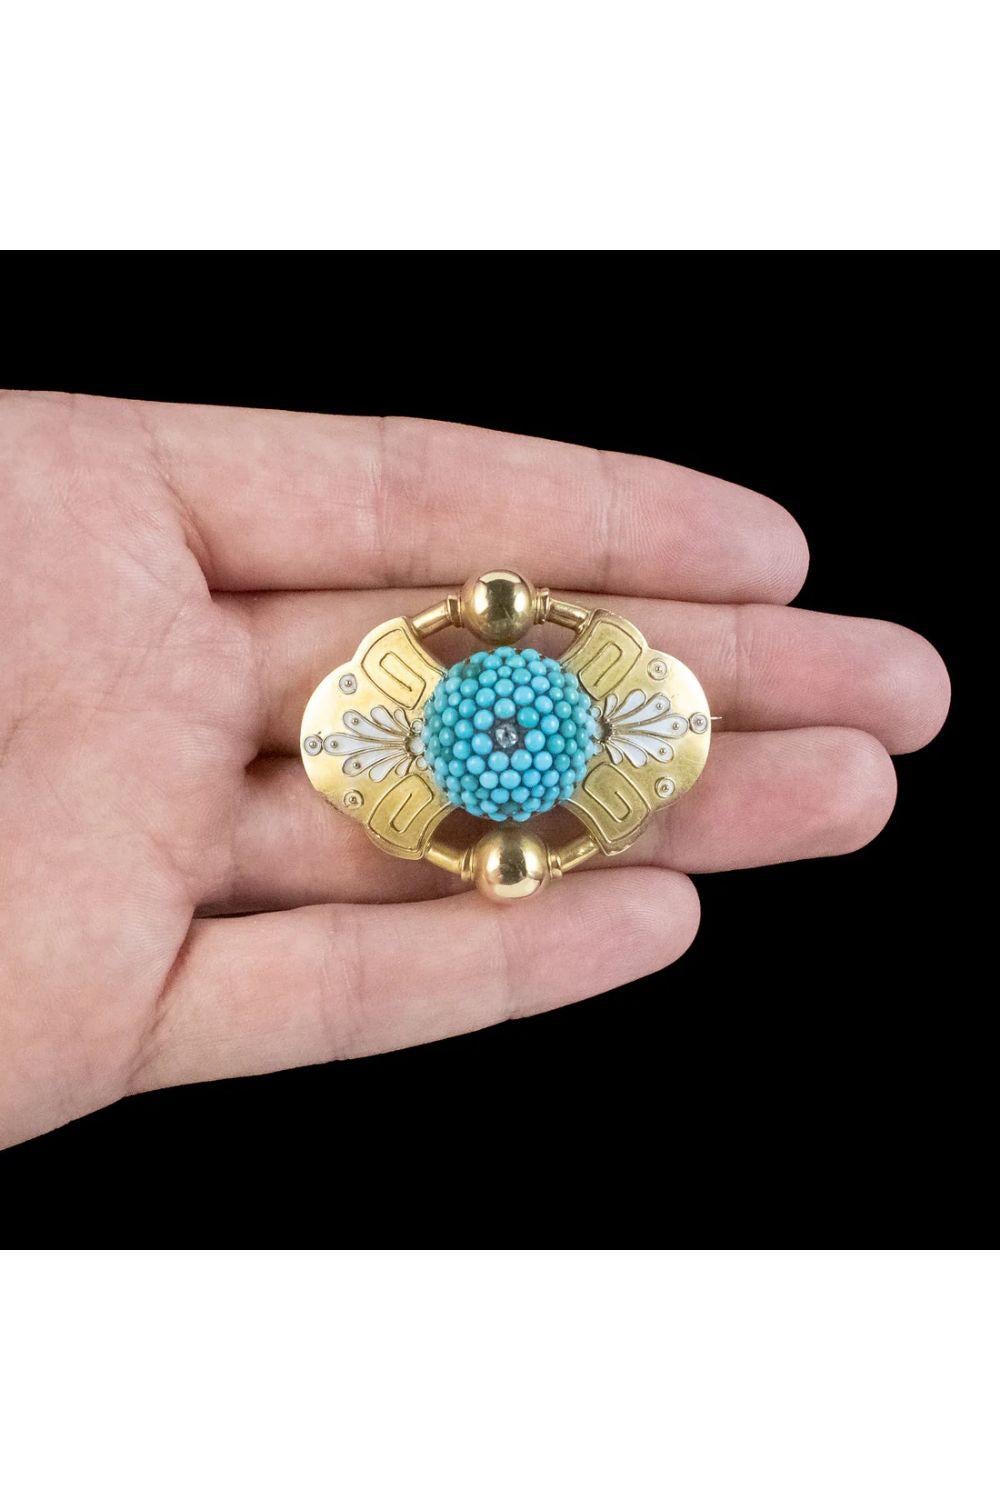 Etruscan Turquoise Diamond Mourning Brooch in 18ct Gold., circa 1860 – 1880 In Good Condition For Sale In Kendal, GB